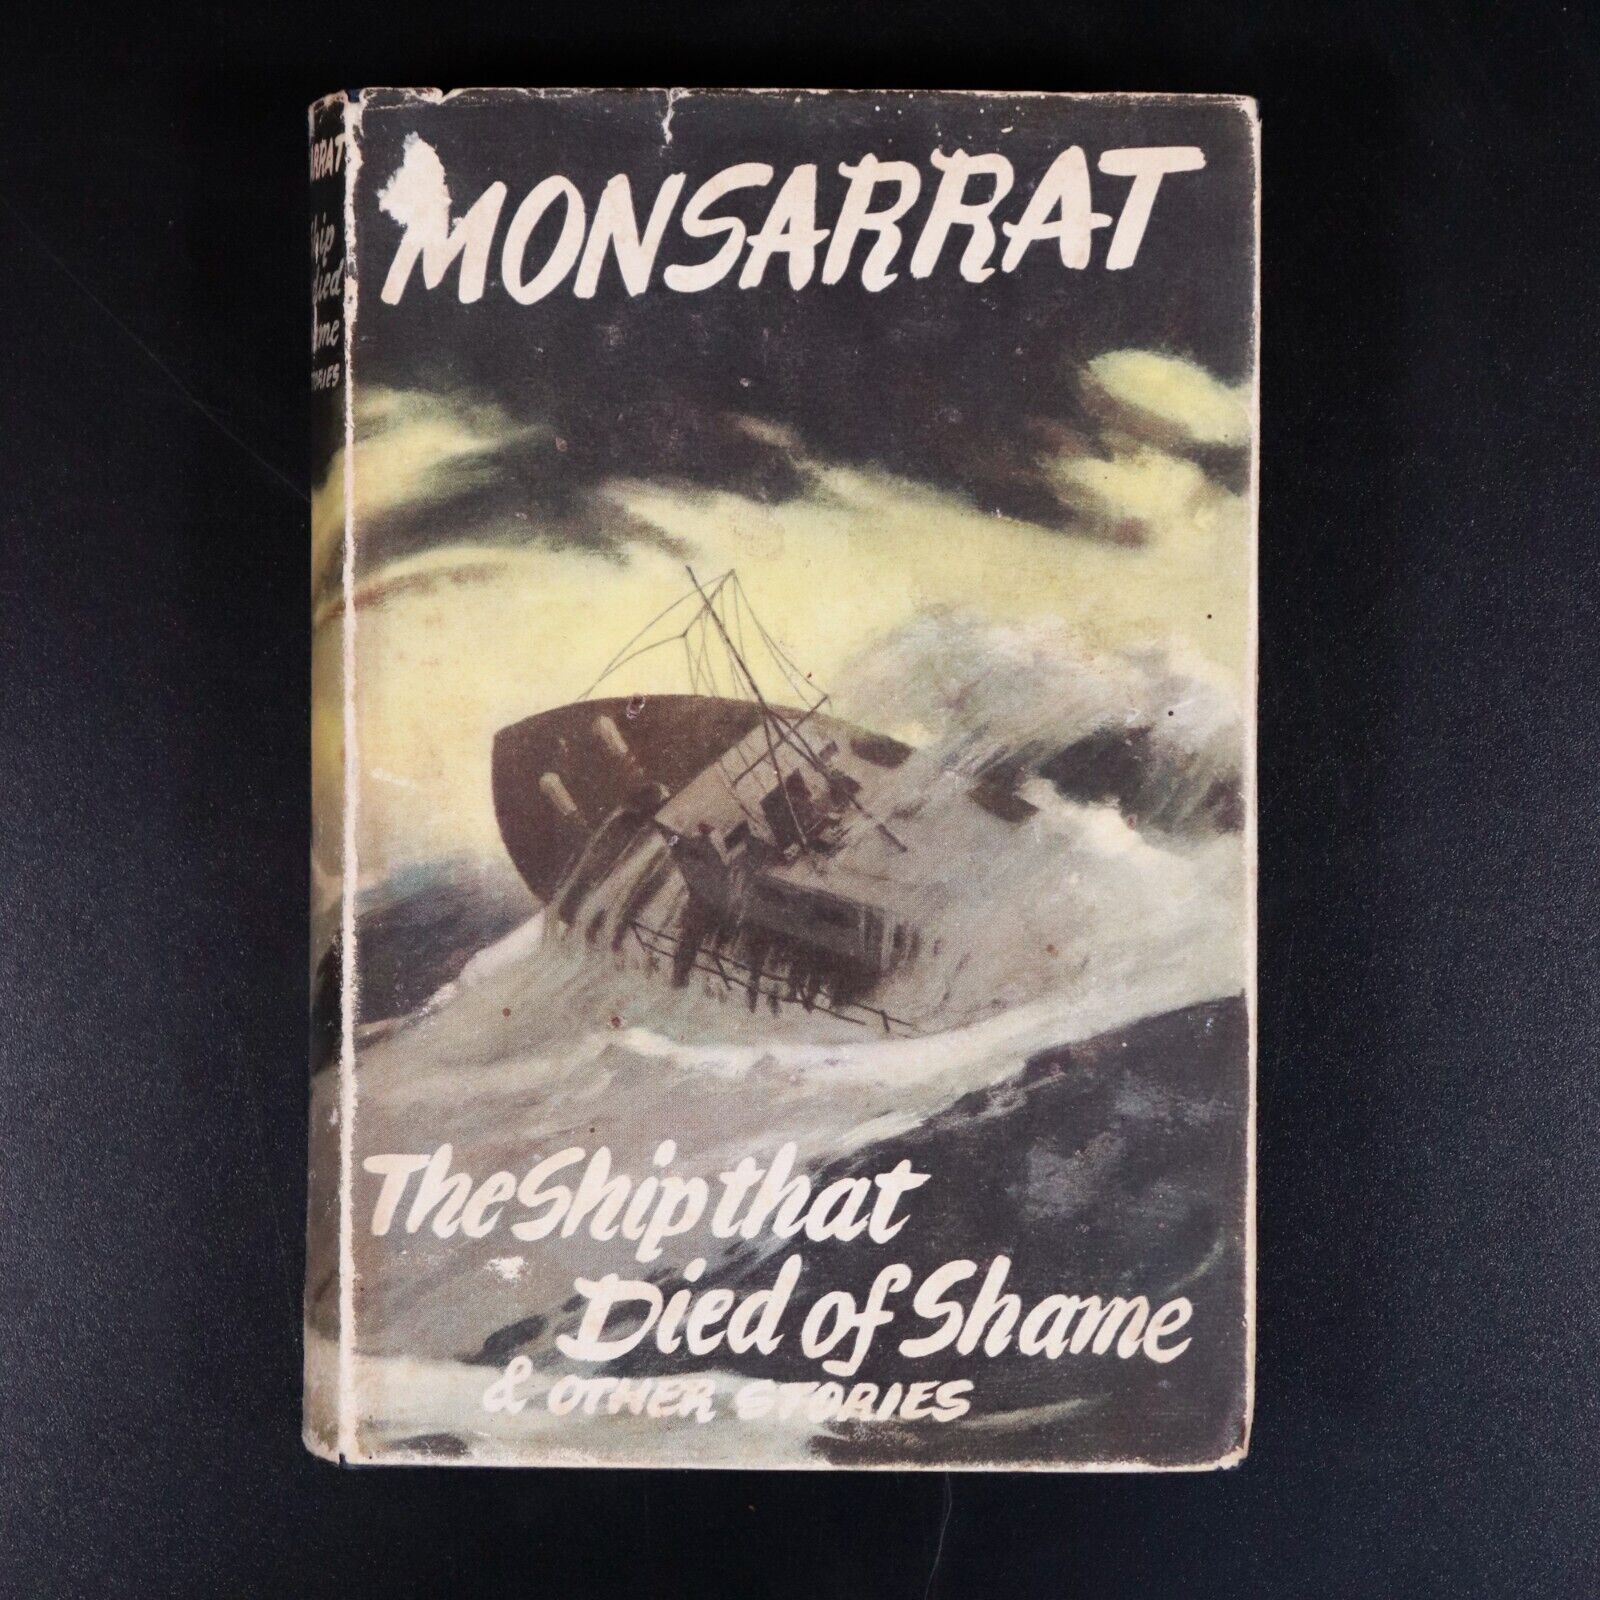 1959 The Ship That Died Of Shame N. Monsarrat 1st Edition Maritime Fiction Book